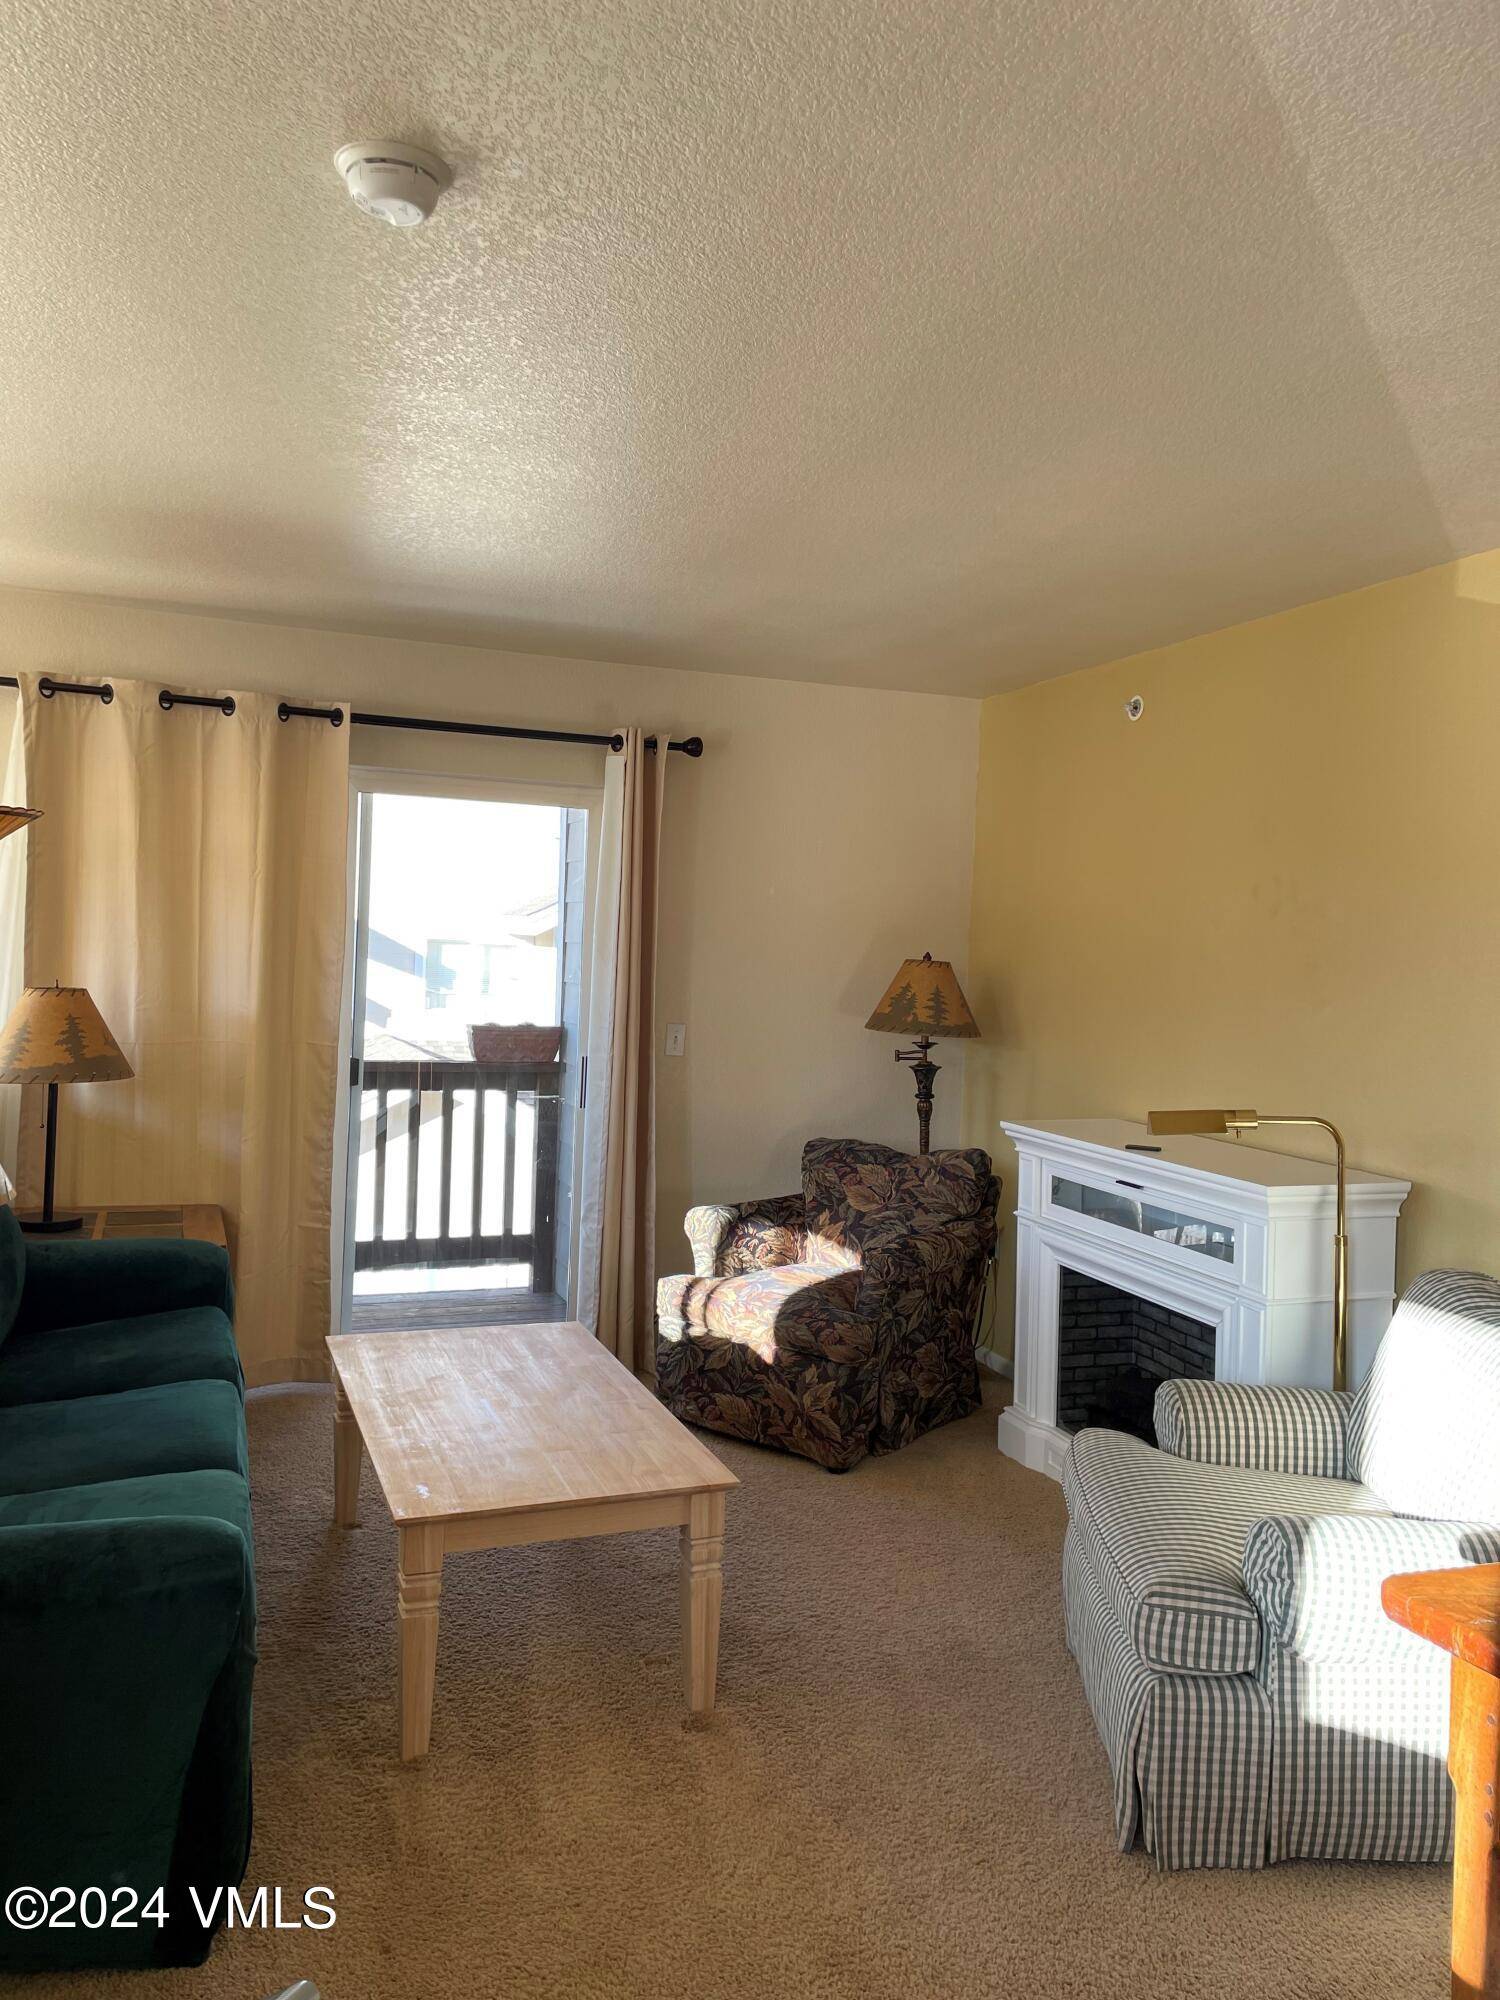 Cozy unit that is partially furnished no kitchen stuff or linens, furniture only furnished.